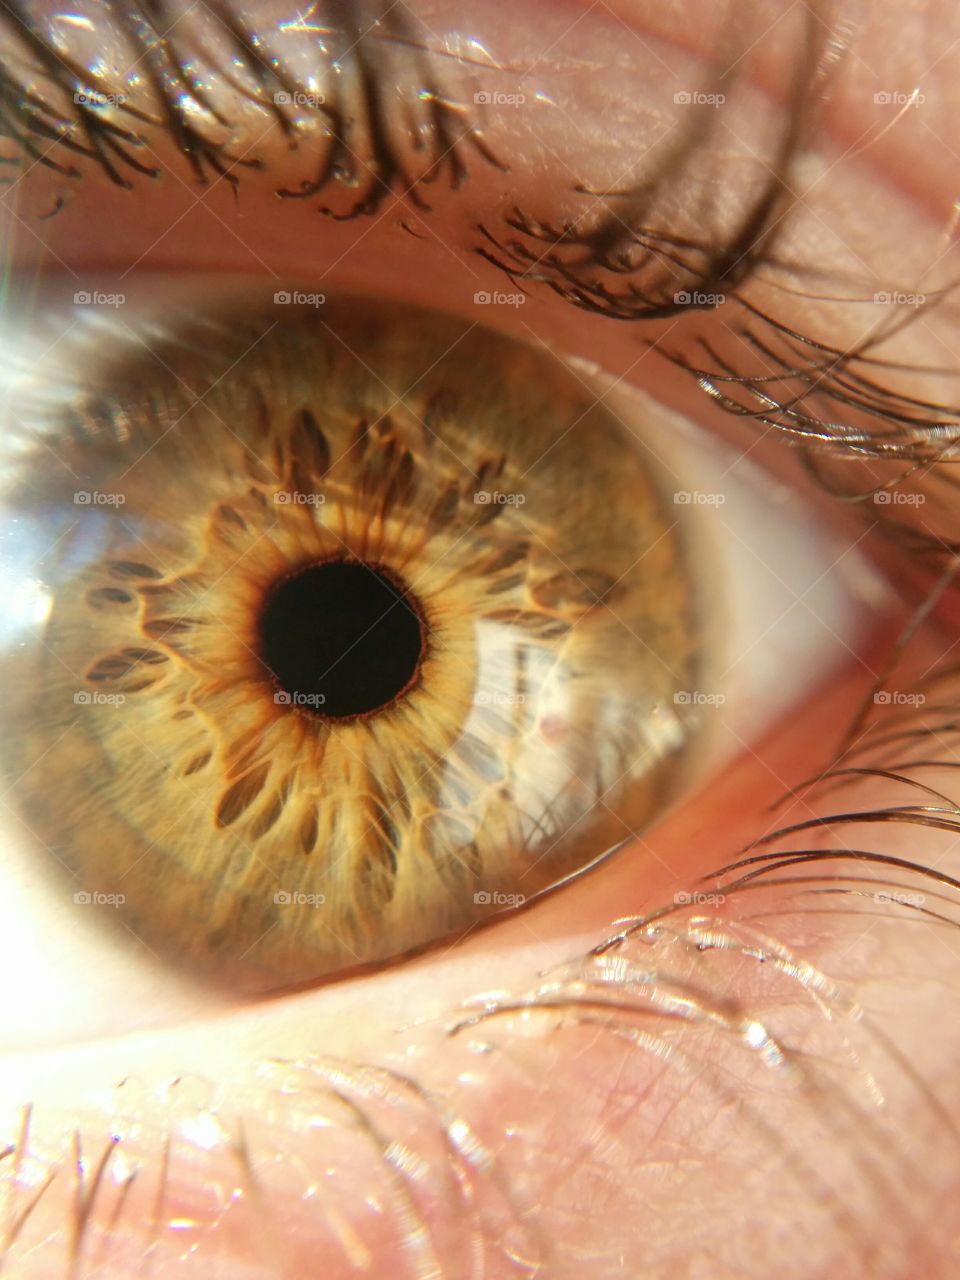 Extreme close-up of a human eye